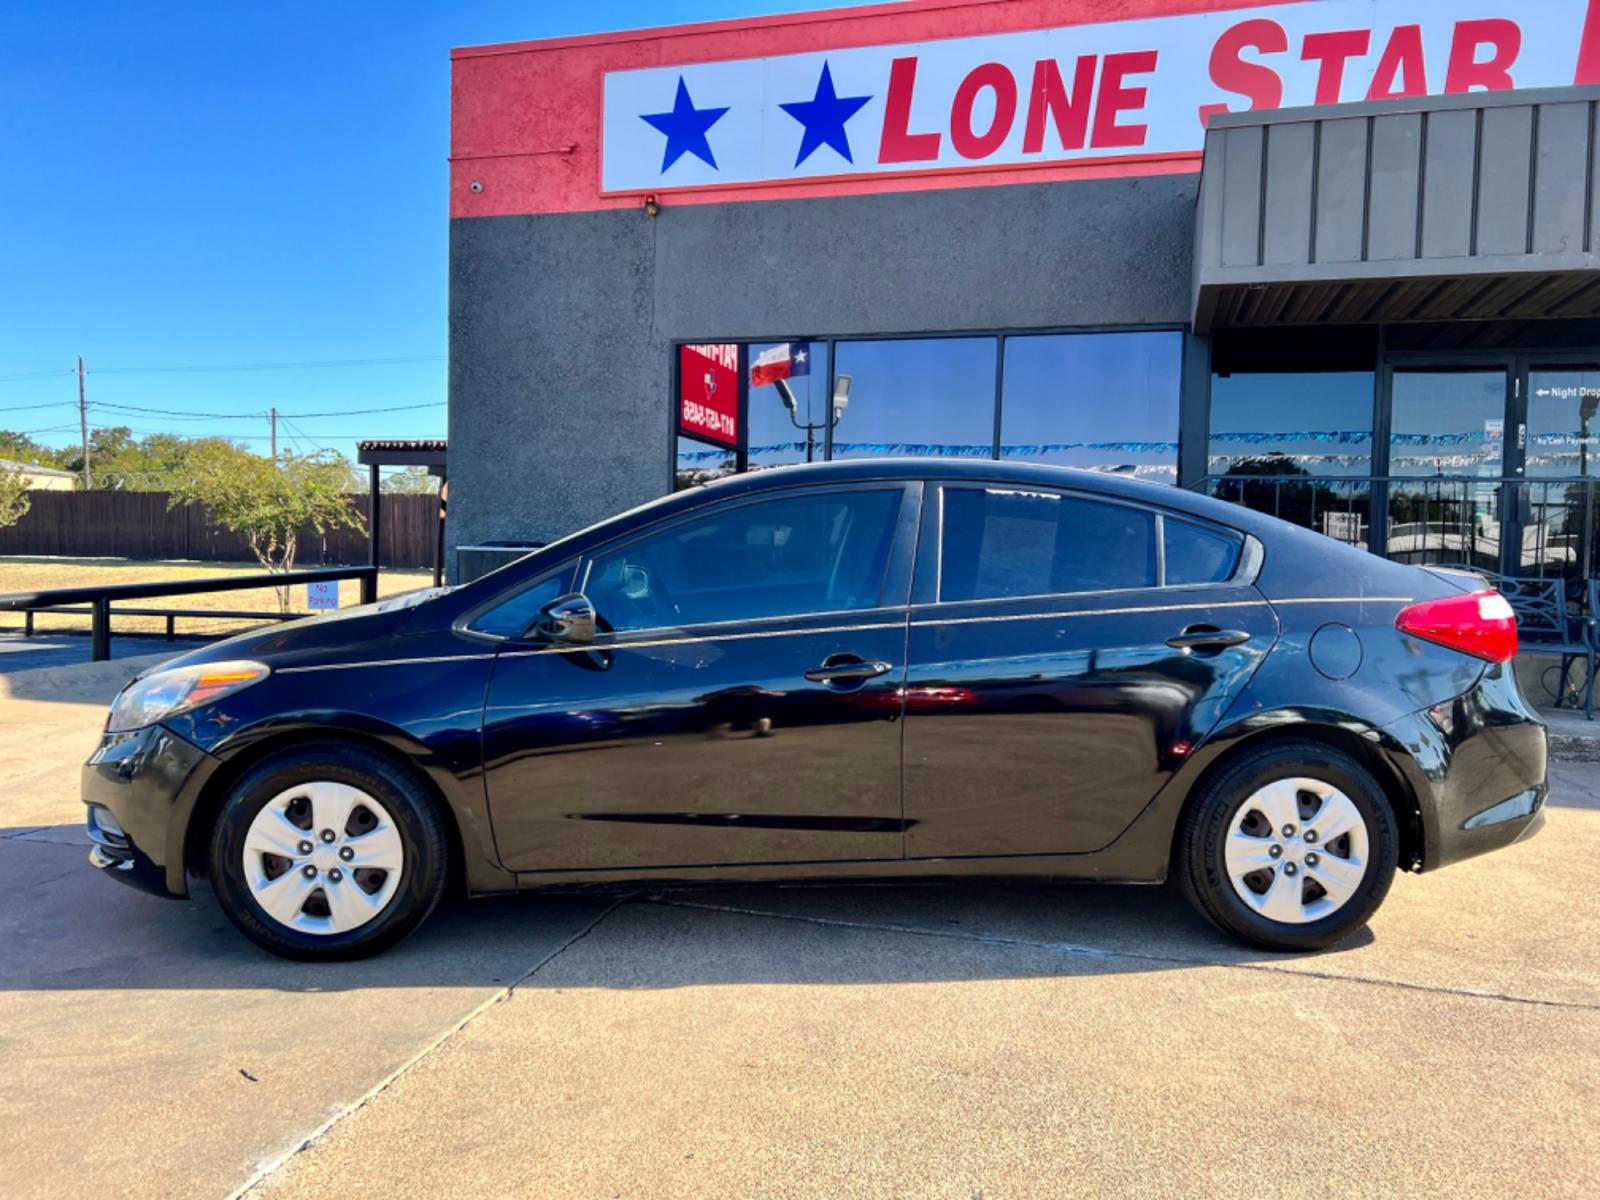 2016 BLACK KIA FORTE LX (KNAFK4A61G5) , located at 5900 E. Lancaster Ave., Fort Worth, TX, 76112, (817) 457-5456, 0.000000, 0.000000 - Cash CASH CAR ONLY, NO FINANCING AVAILABLE. THIS 2016 KIA FORTE LX 4 DOOR SEDAN RUNS AND DRIVES GREAT. IT IS EQUIPPED WITH A CD PLAYER, AM/FM RADIO AND AN AUX PORT. THE TIRES ARE IN GOOD CONDITION AND STILL HAVE TREAD LEFT ON THEM. THIS CAR WILL NOT LAST SO ACT FAST! Call or text Frances a - Photo #3